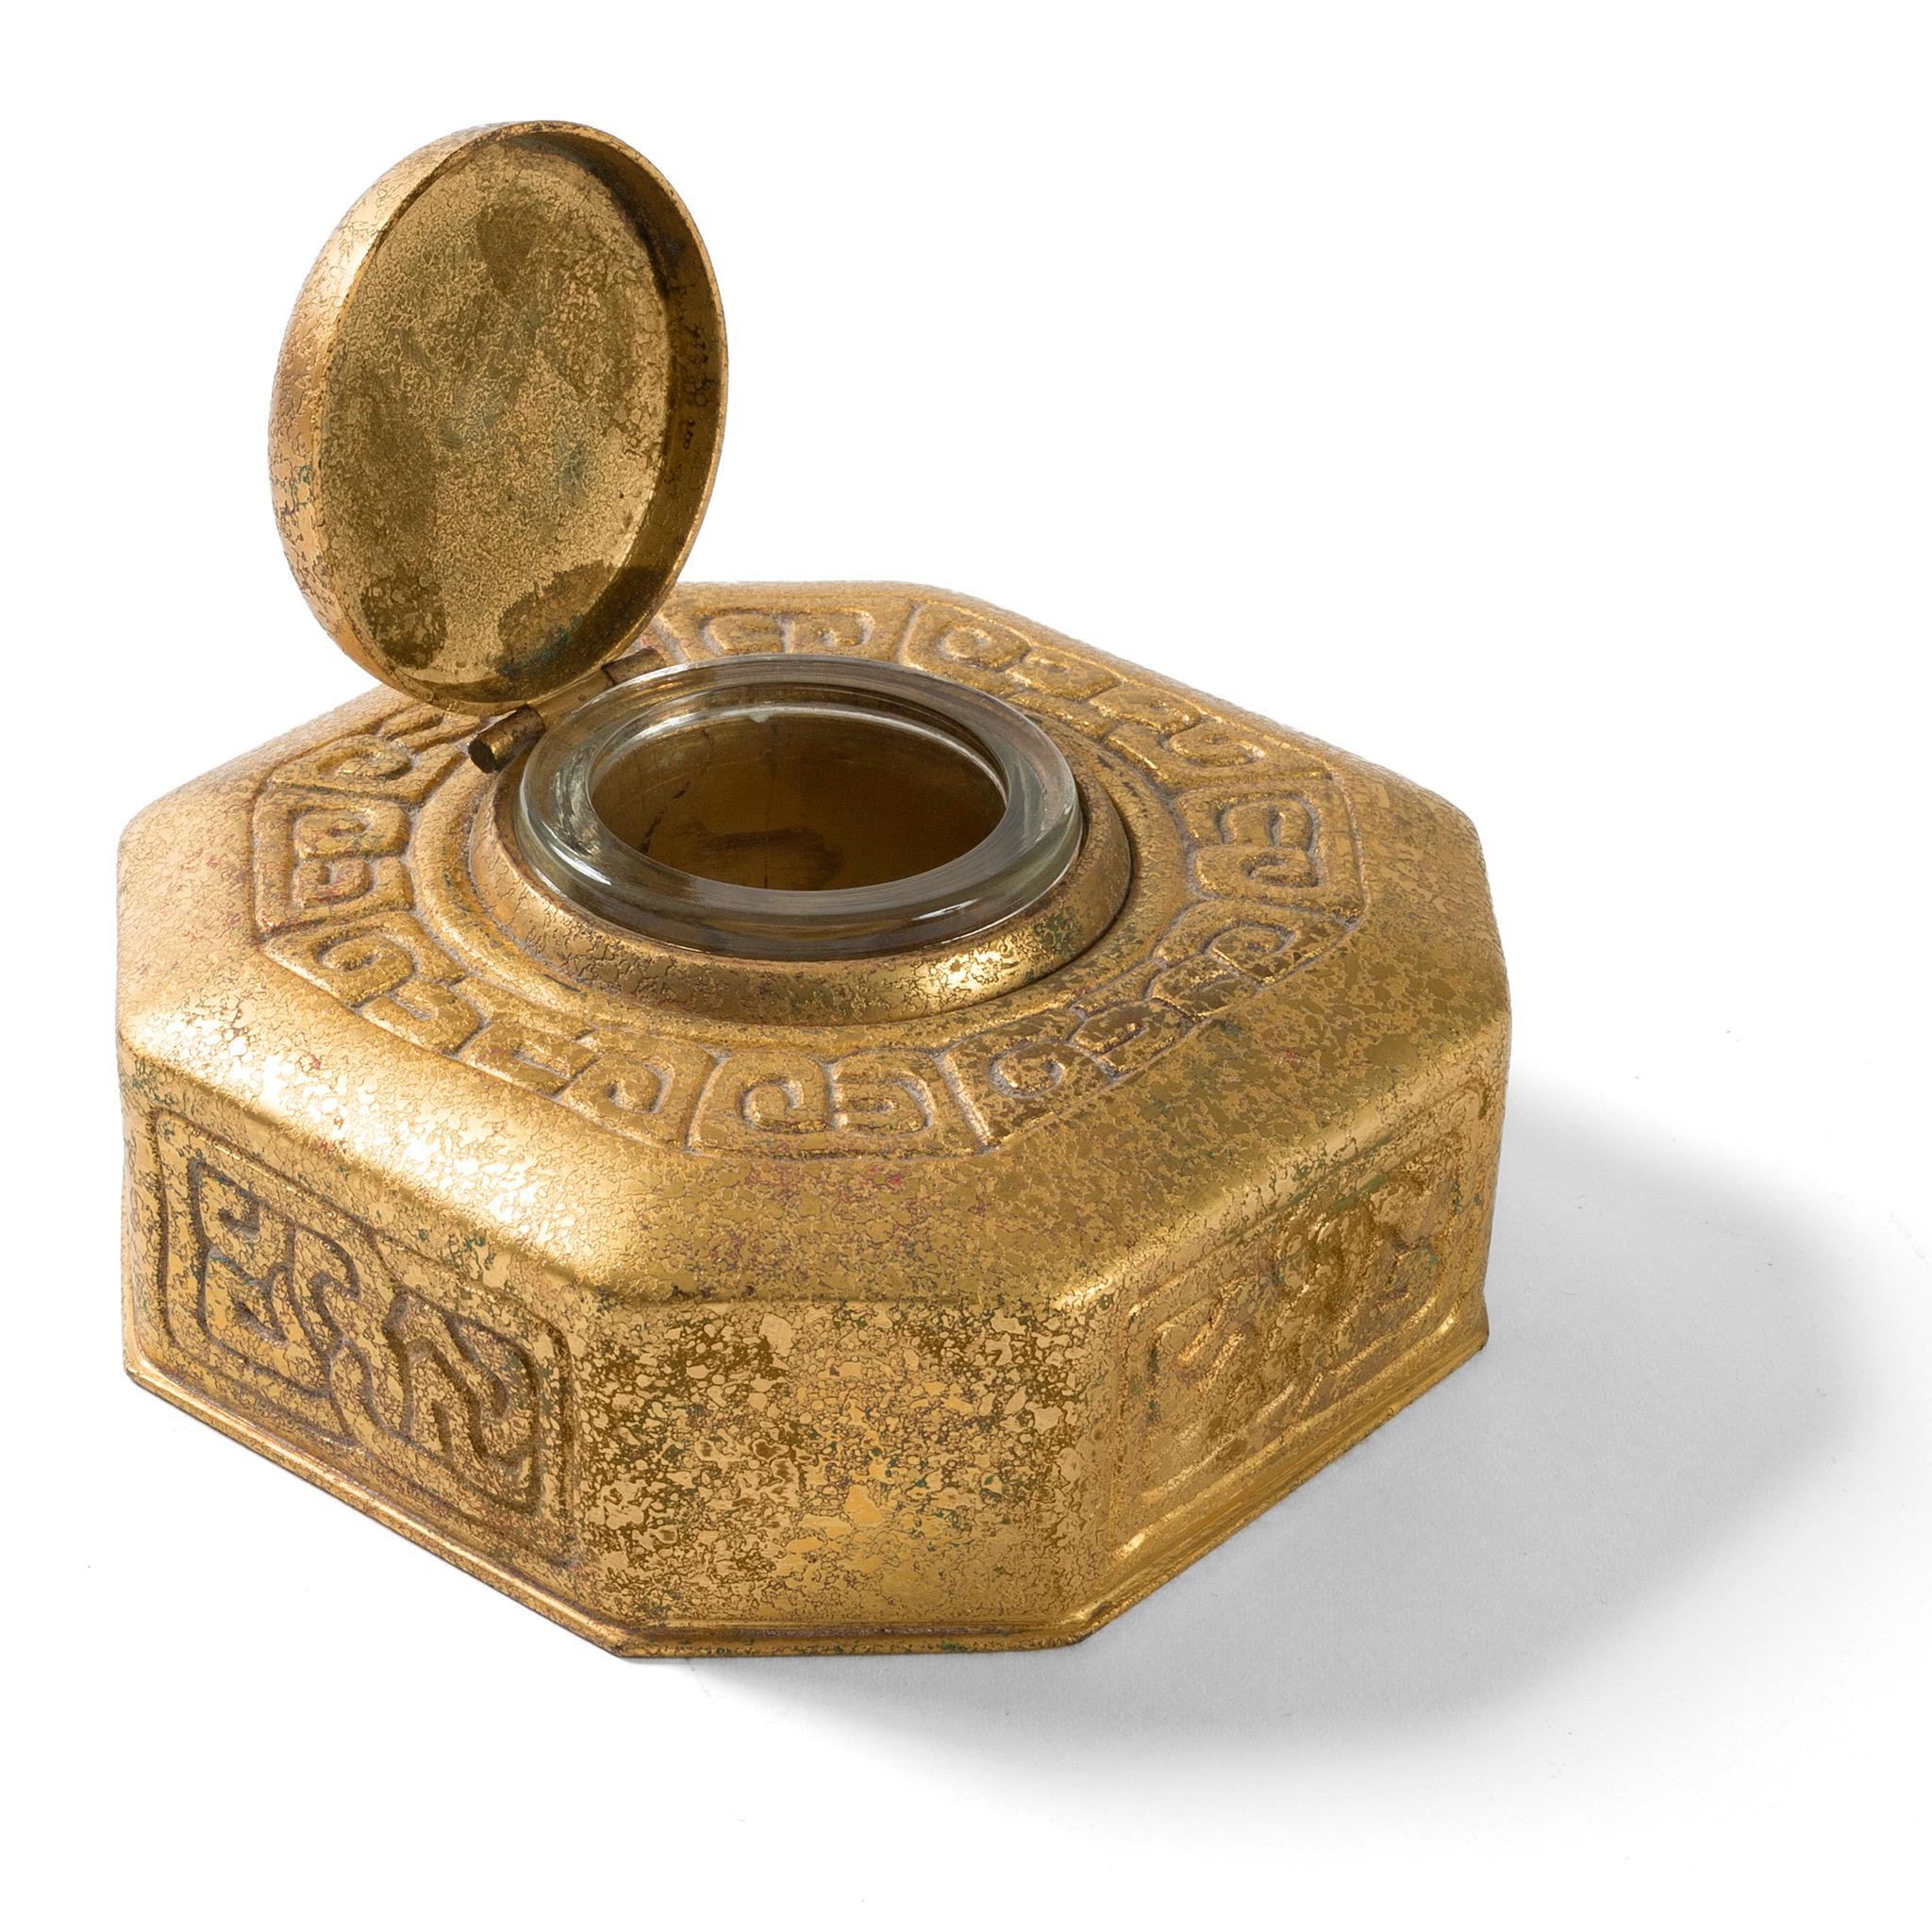 A gilt bronze “Zodiac” inkwell by Tiffany Studios New York. The inkwell features intricate pseudo-Celtic patterning interspersed with circular elements in sky blue, each of which features a stylized depiction of one of the 12 signs of the Zodiac,